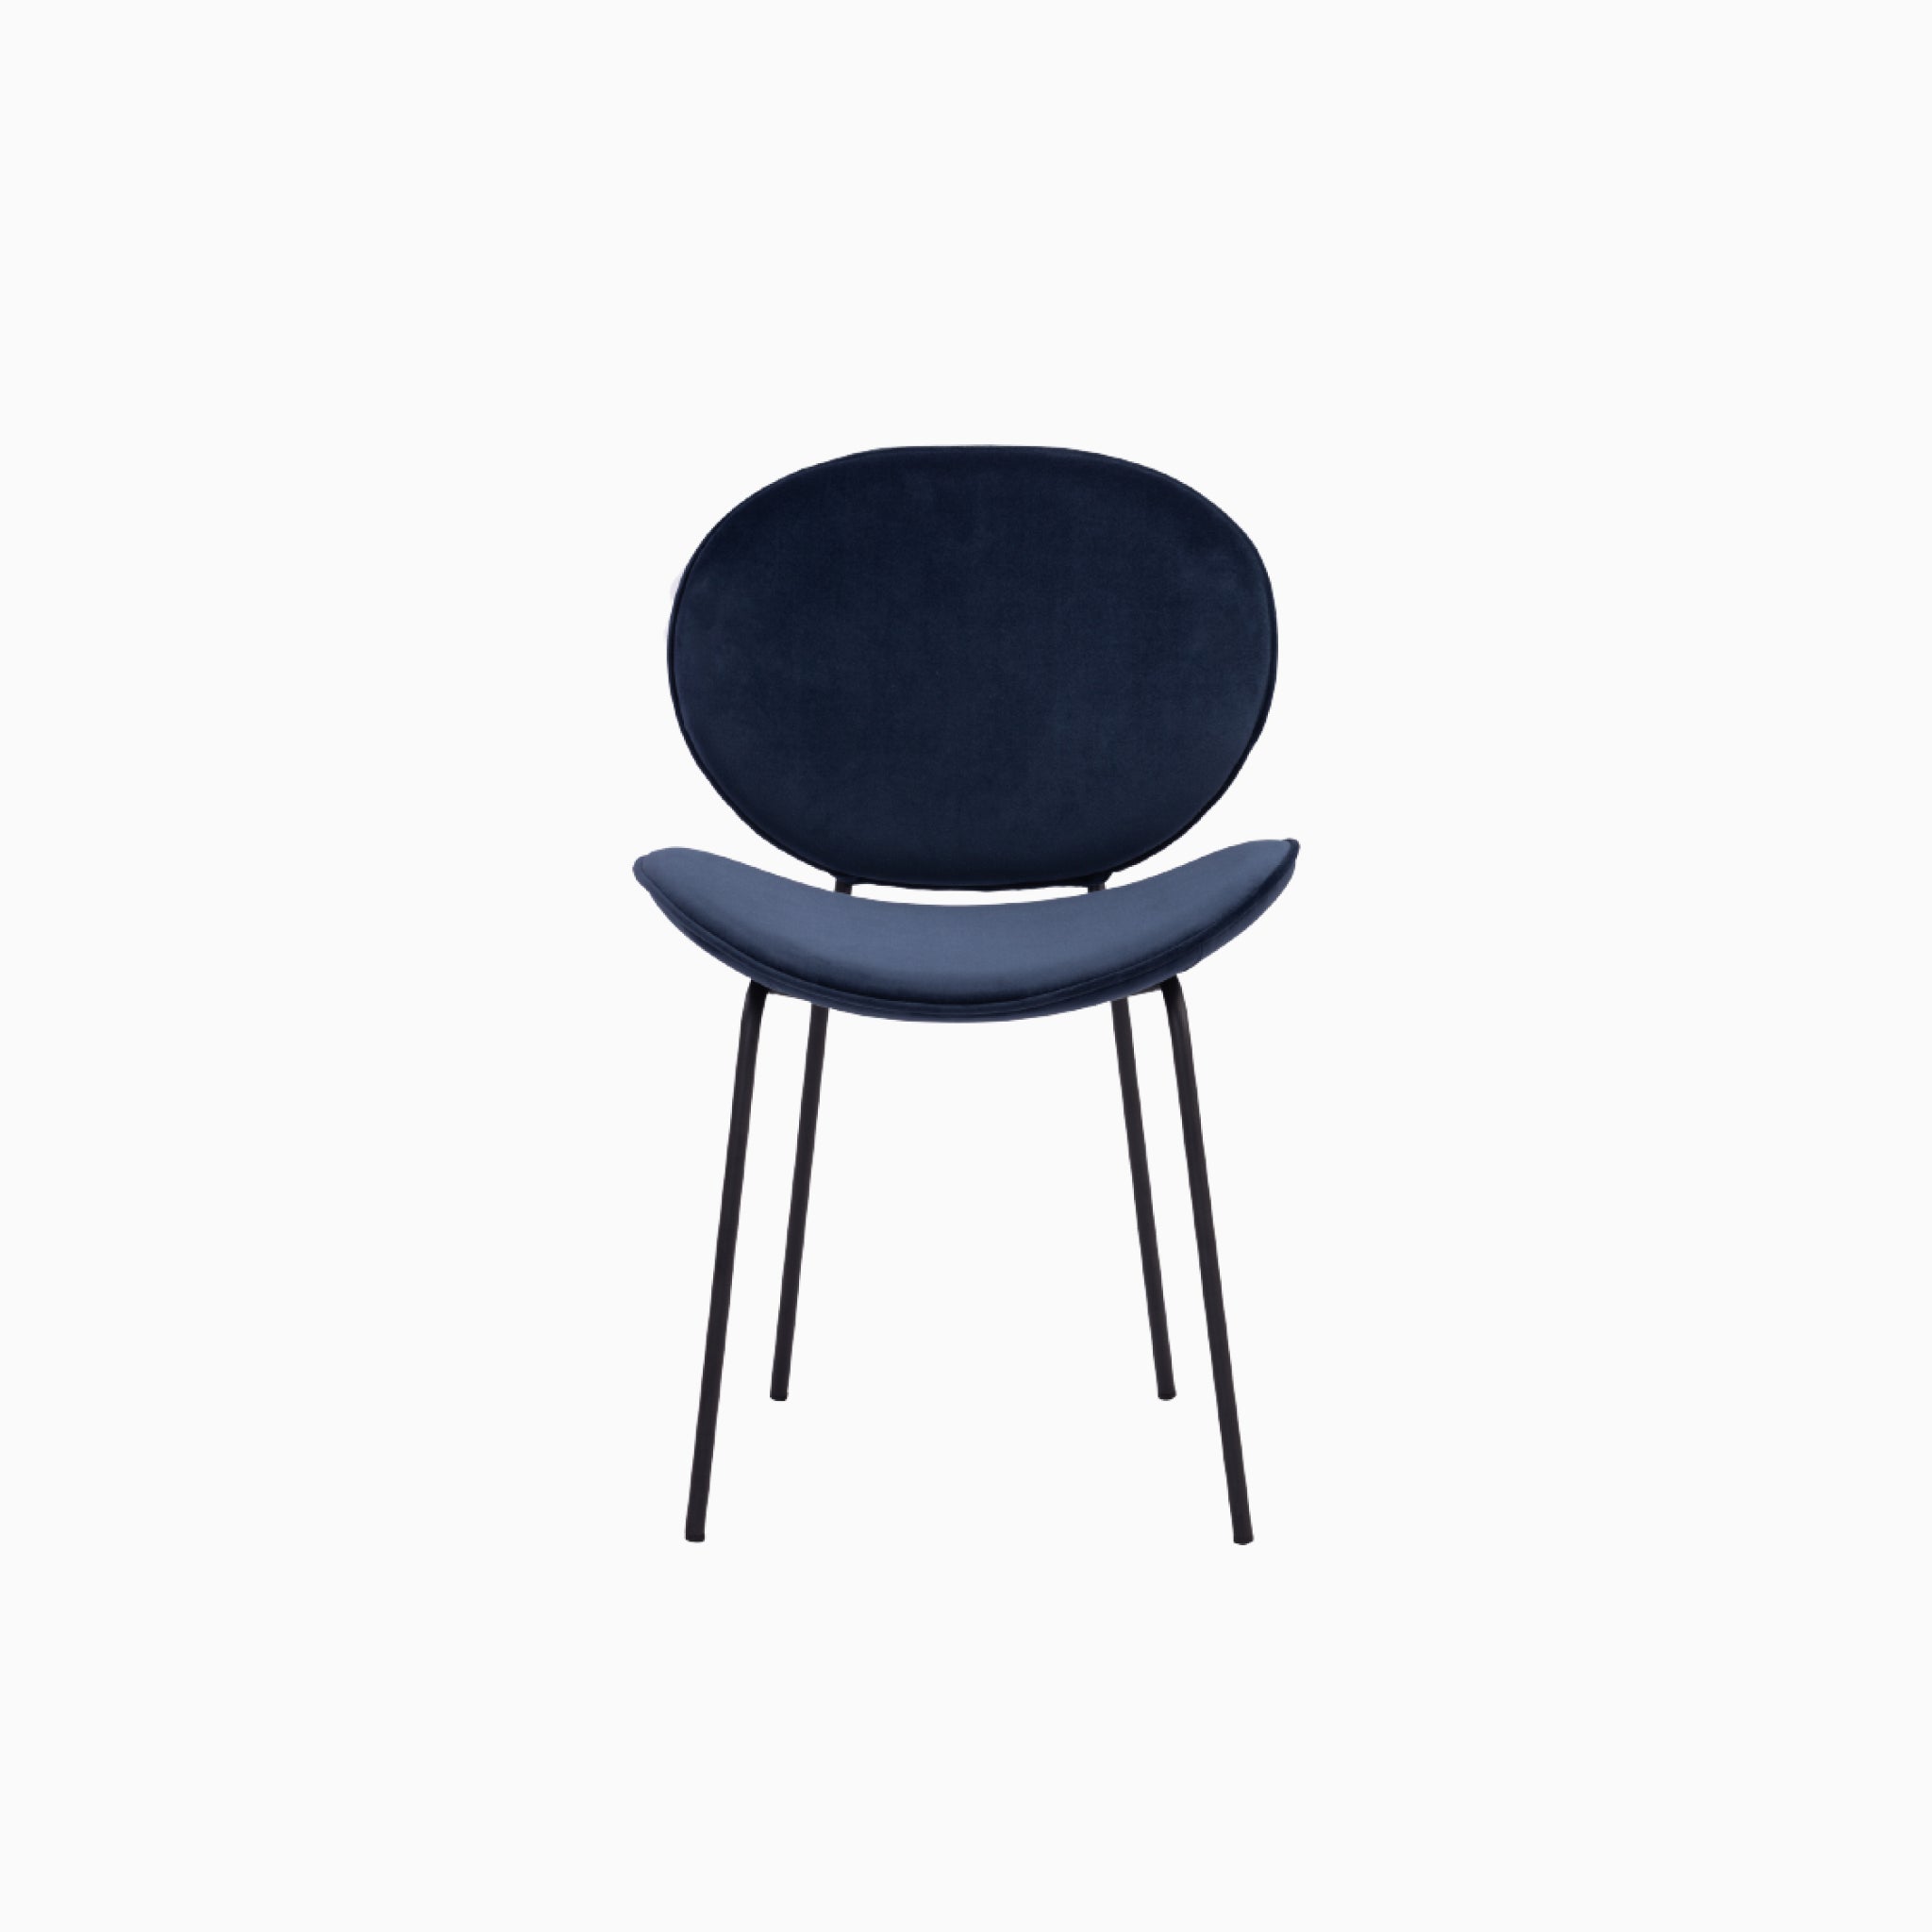 Lumo Grey Dining Chair with Black Leg (Set of 2)